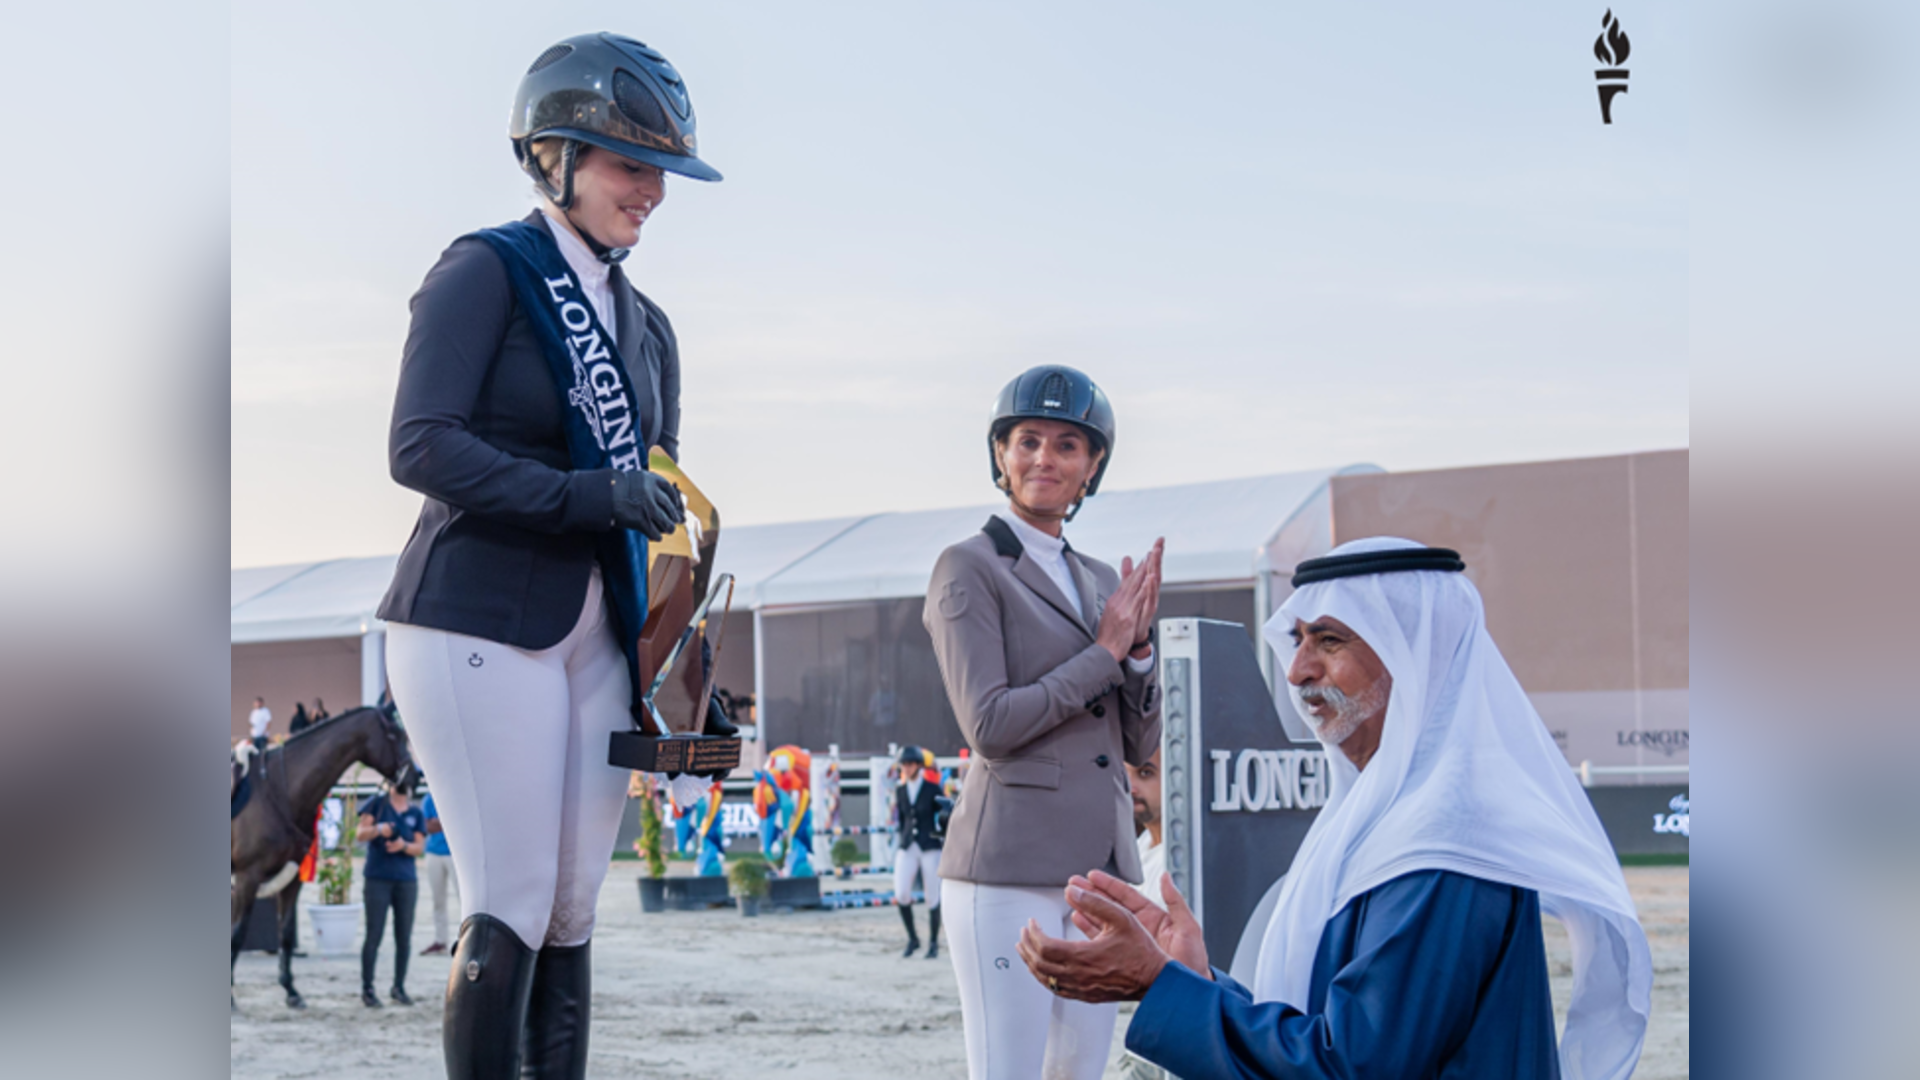 His Excellency Sheikh Nahayan bin Mabarak Al Nahyan Awards Belgium’s Chloe Vranken With The Top Prize on Final Day of 11th edition of the FBMA International Show Jumping Cup